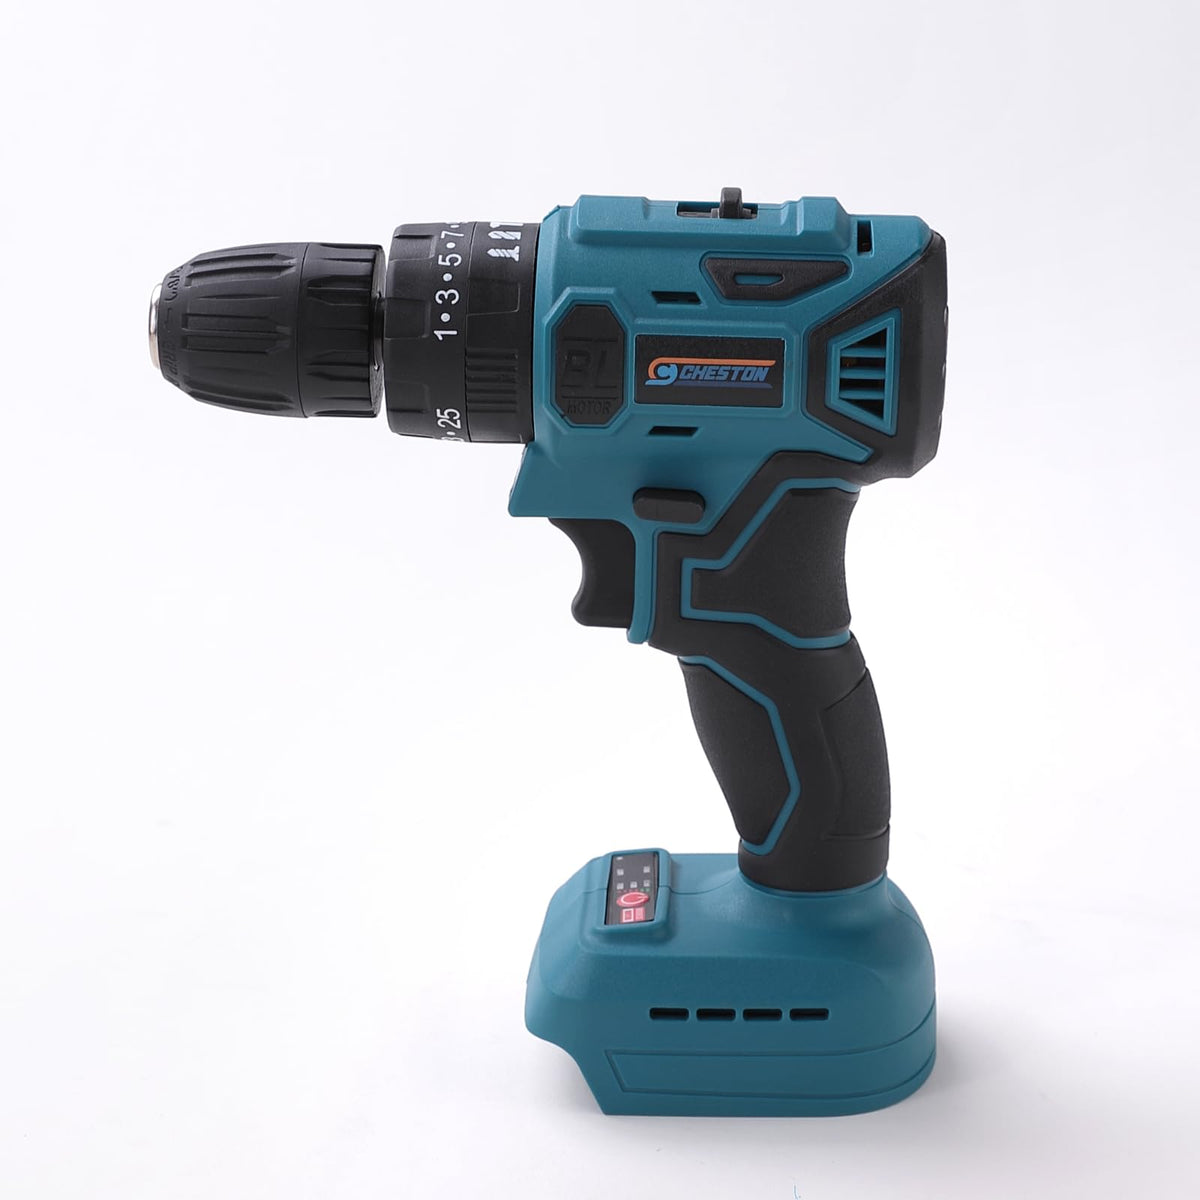 Cheston One 21V Cordless Impact Drill Brushless (Battery & Charger not included) No Load Speed 1500RPM Max Torque 35NM 10 mm Chuck Size Cordless Drill